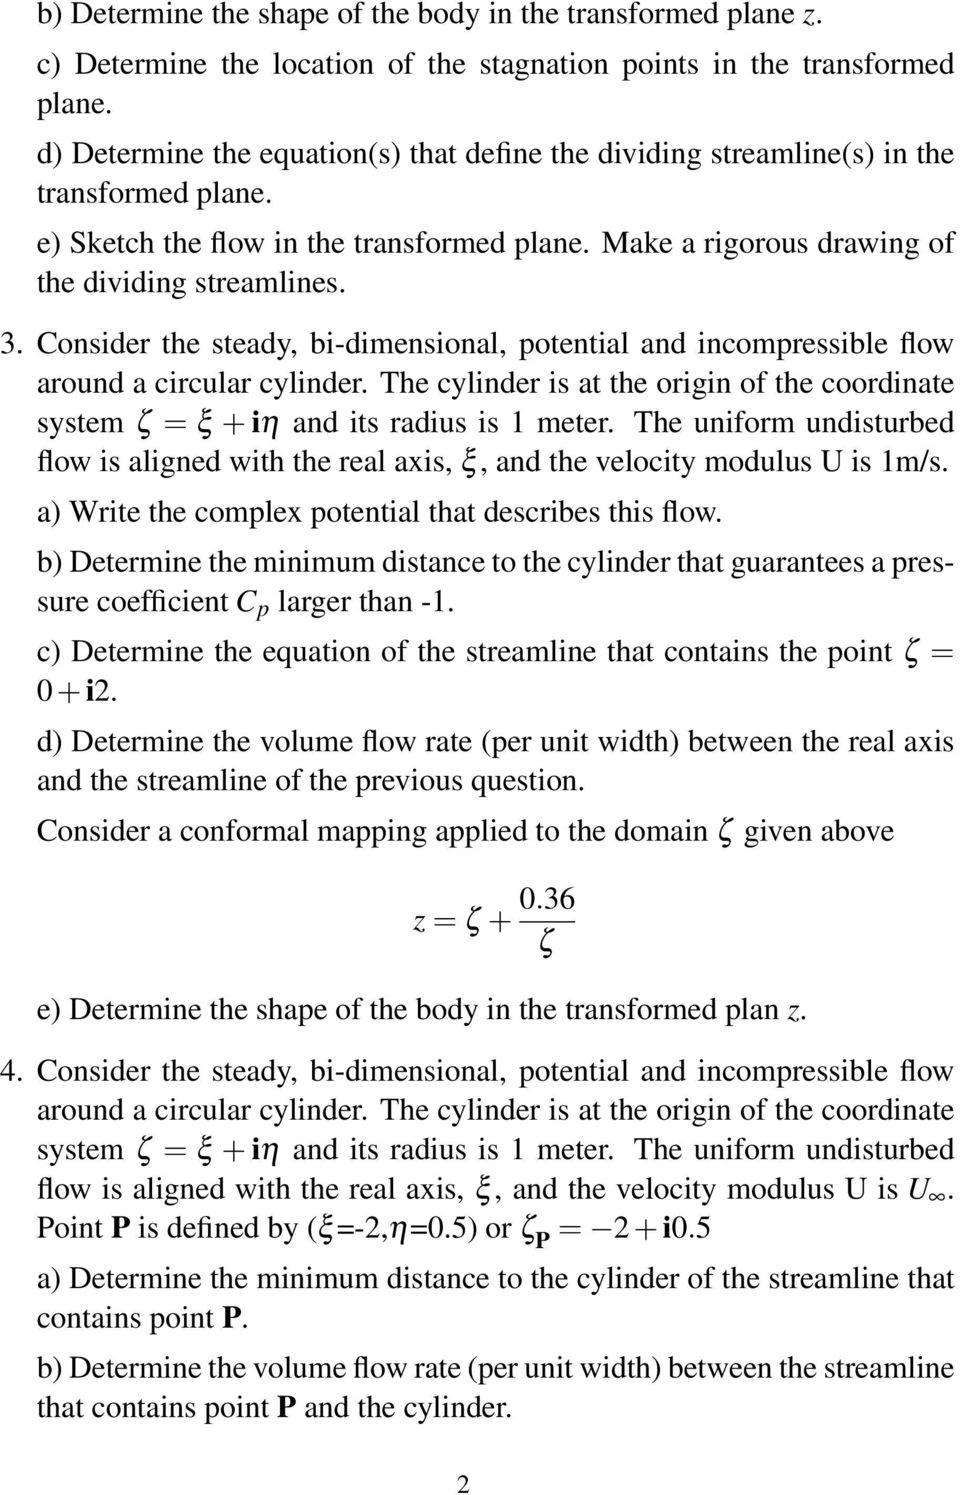 Consider the steady, bi-dimensional, potential and incompressible flow around a circular cylinder. The cylinder is at the origin of the coordinate system ζ = ξ + iη and its radius is 1 meter.